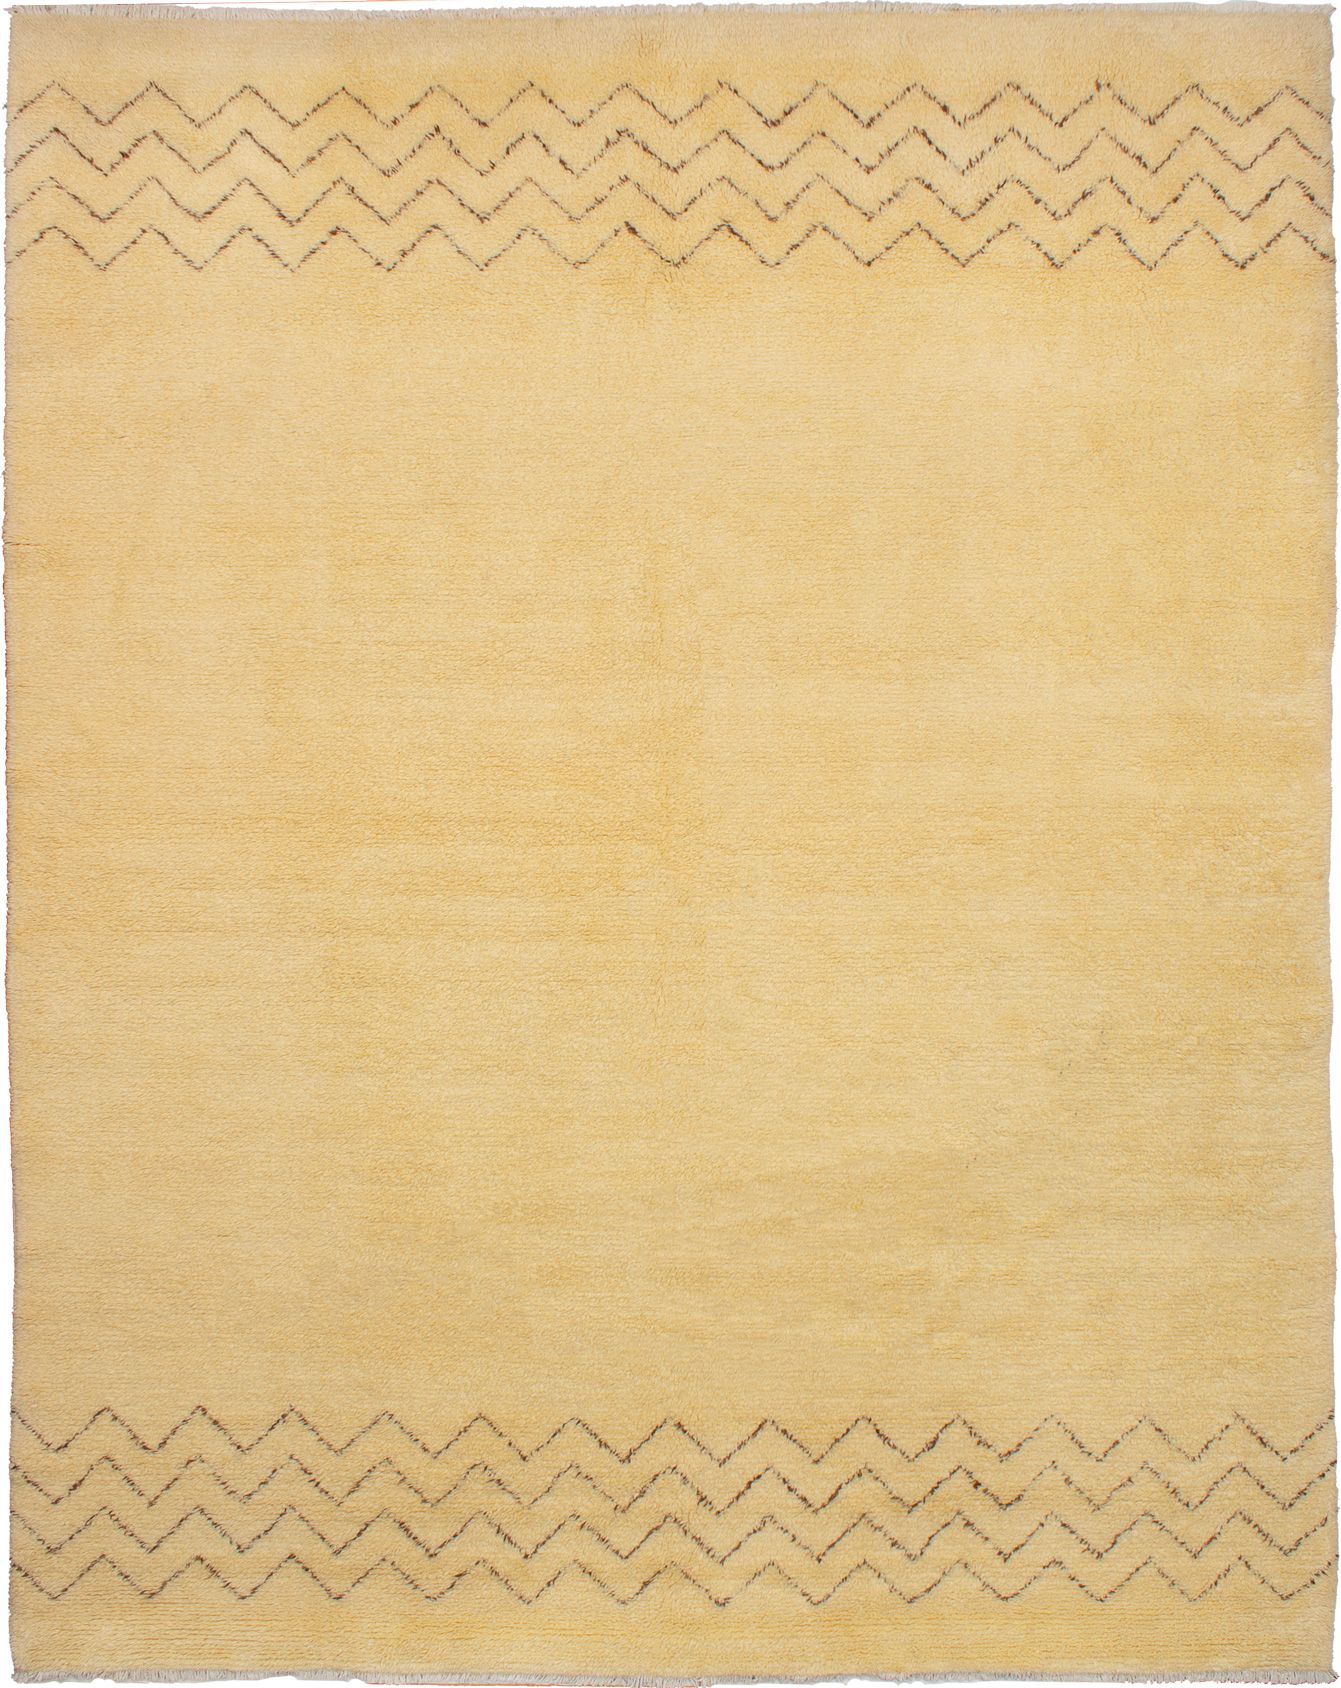 Hand-knotted Royal Maroc Cream Wool Rug 9'4" x 11'10" Size: 9'4" x 11'10"  